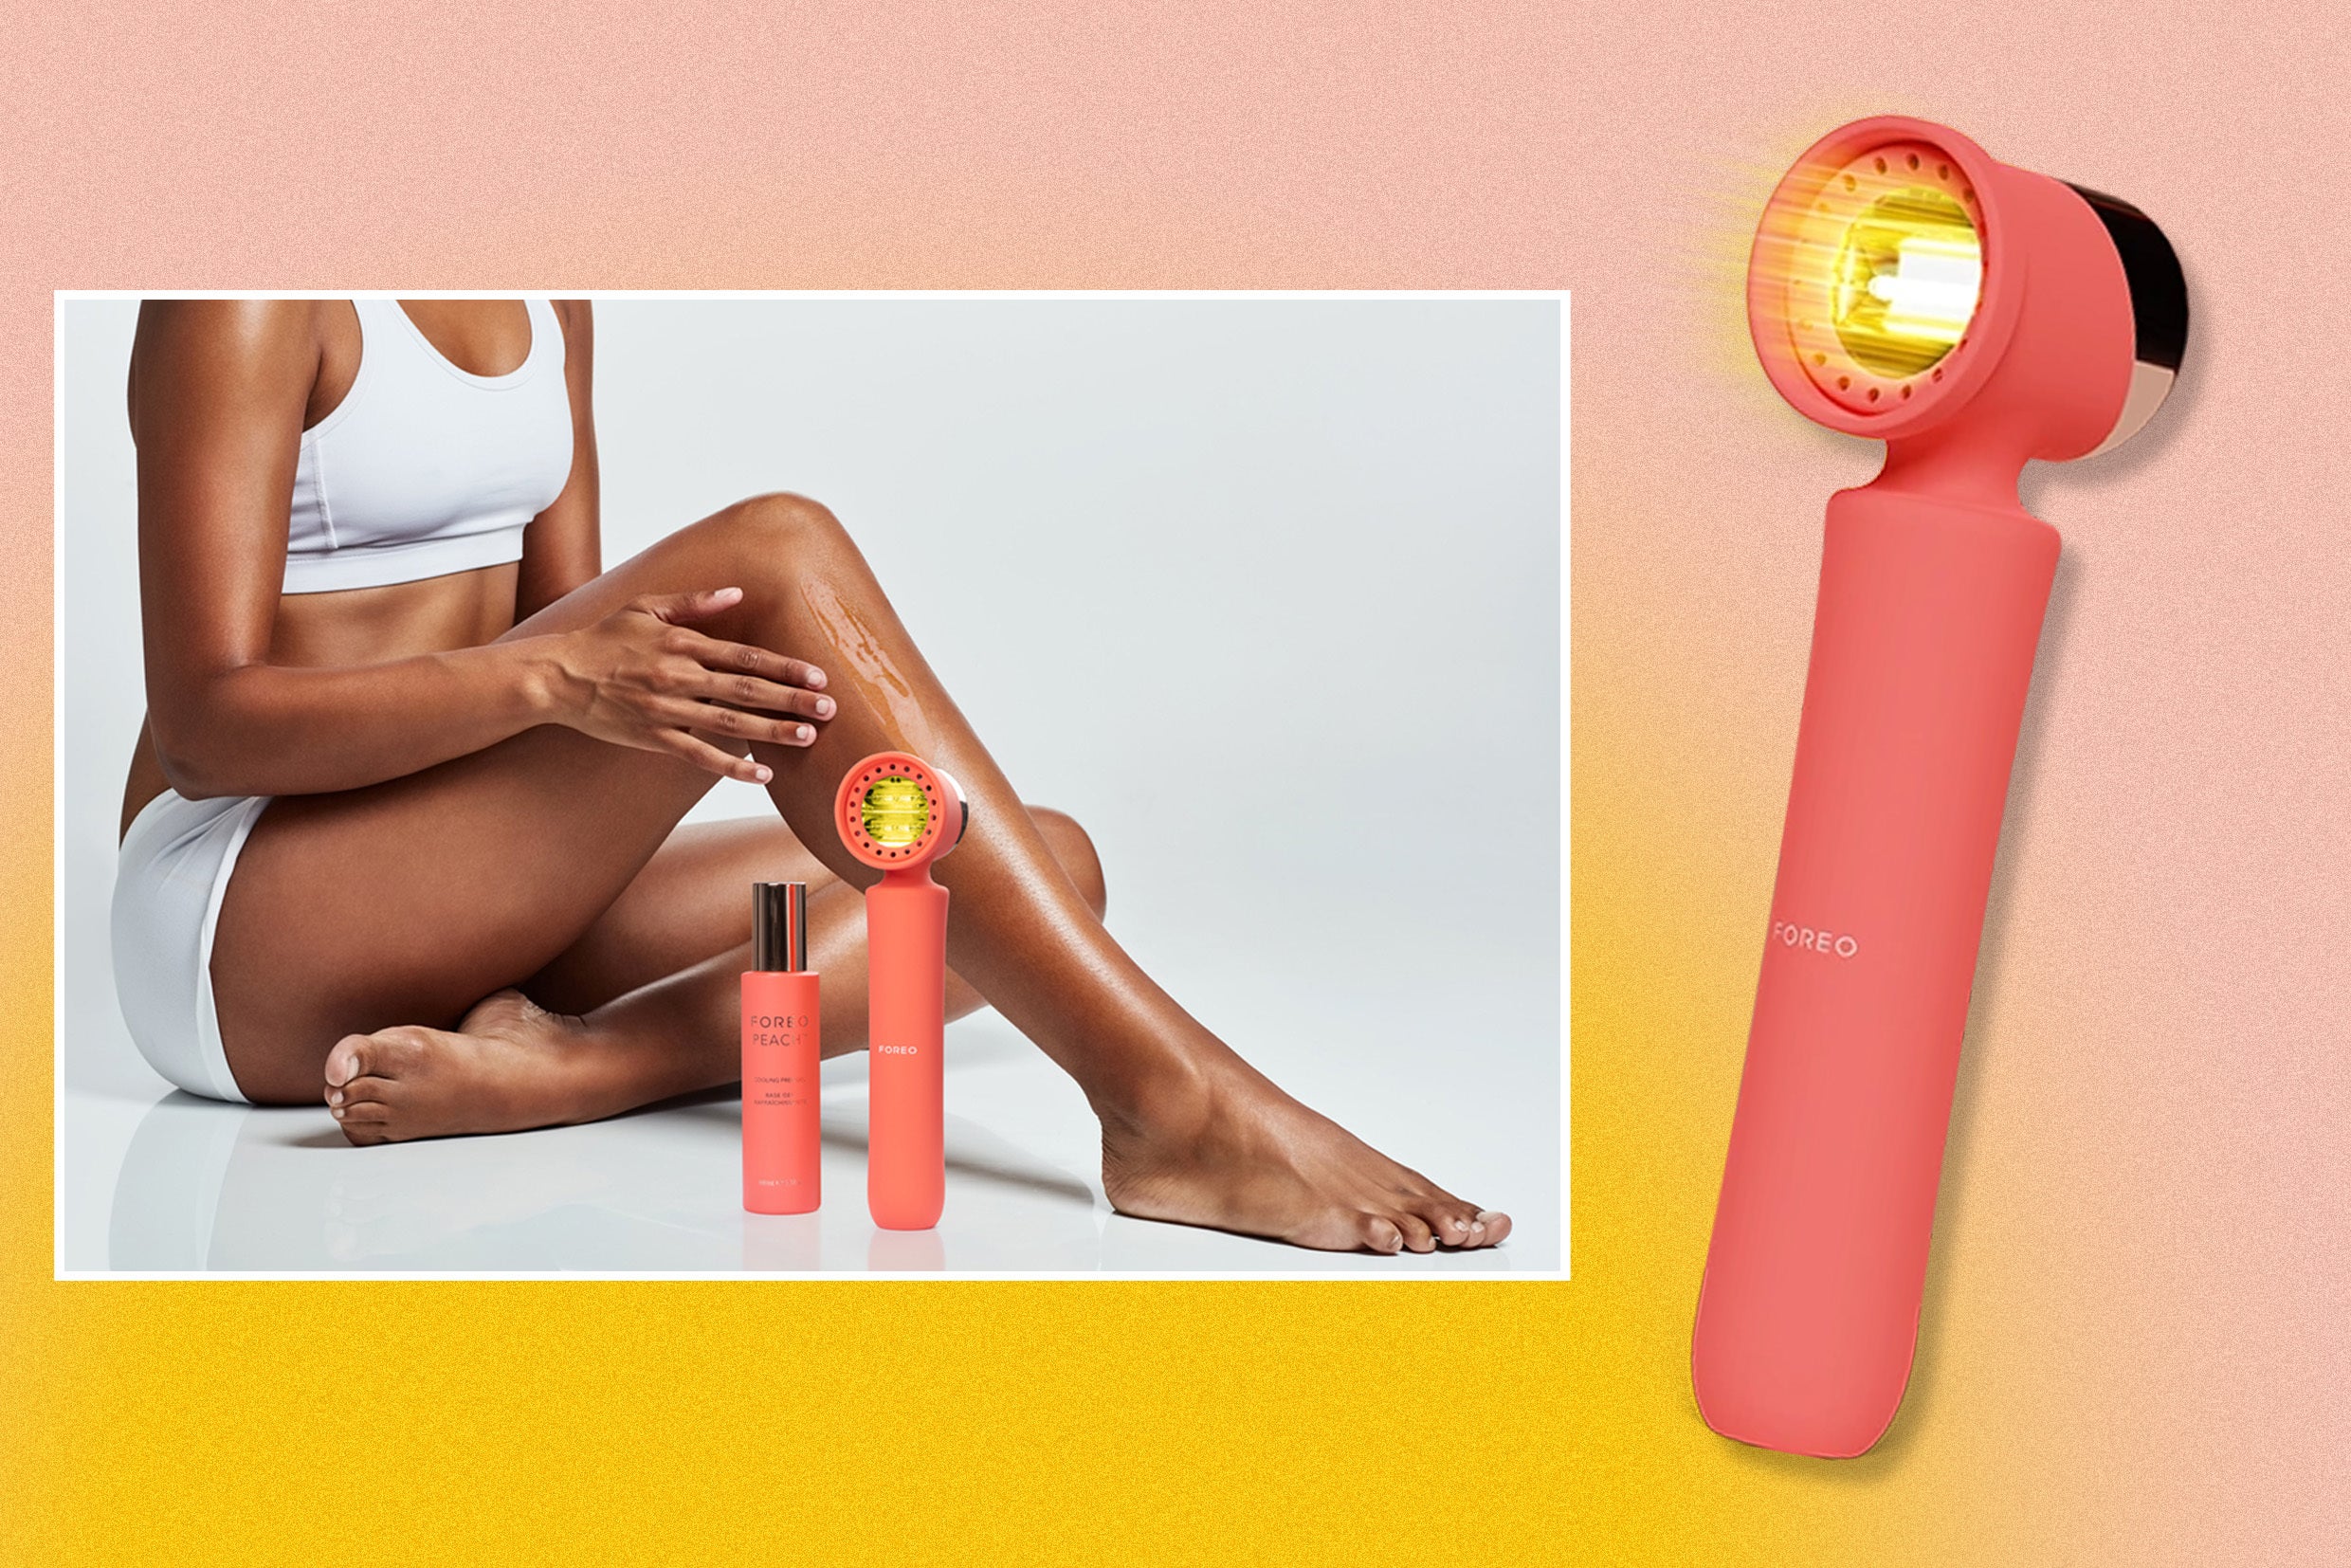 We tried Foreo’s new peach 2 IPL device to see if it’s a smooth operator